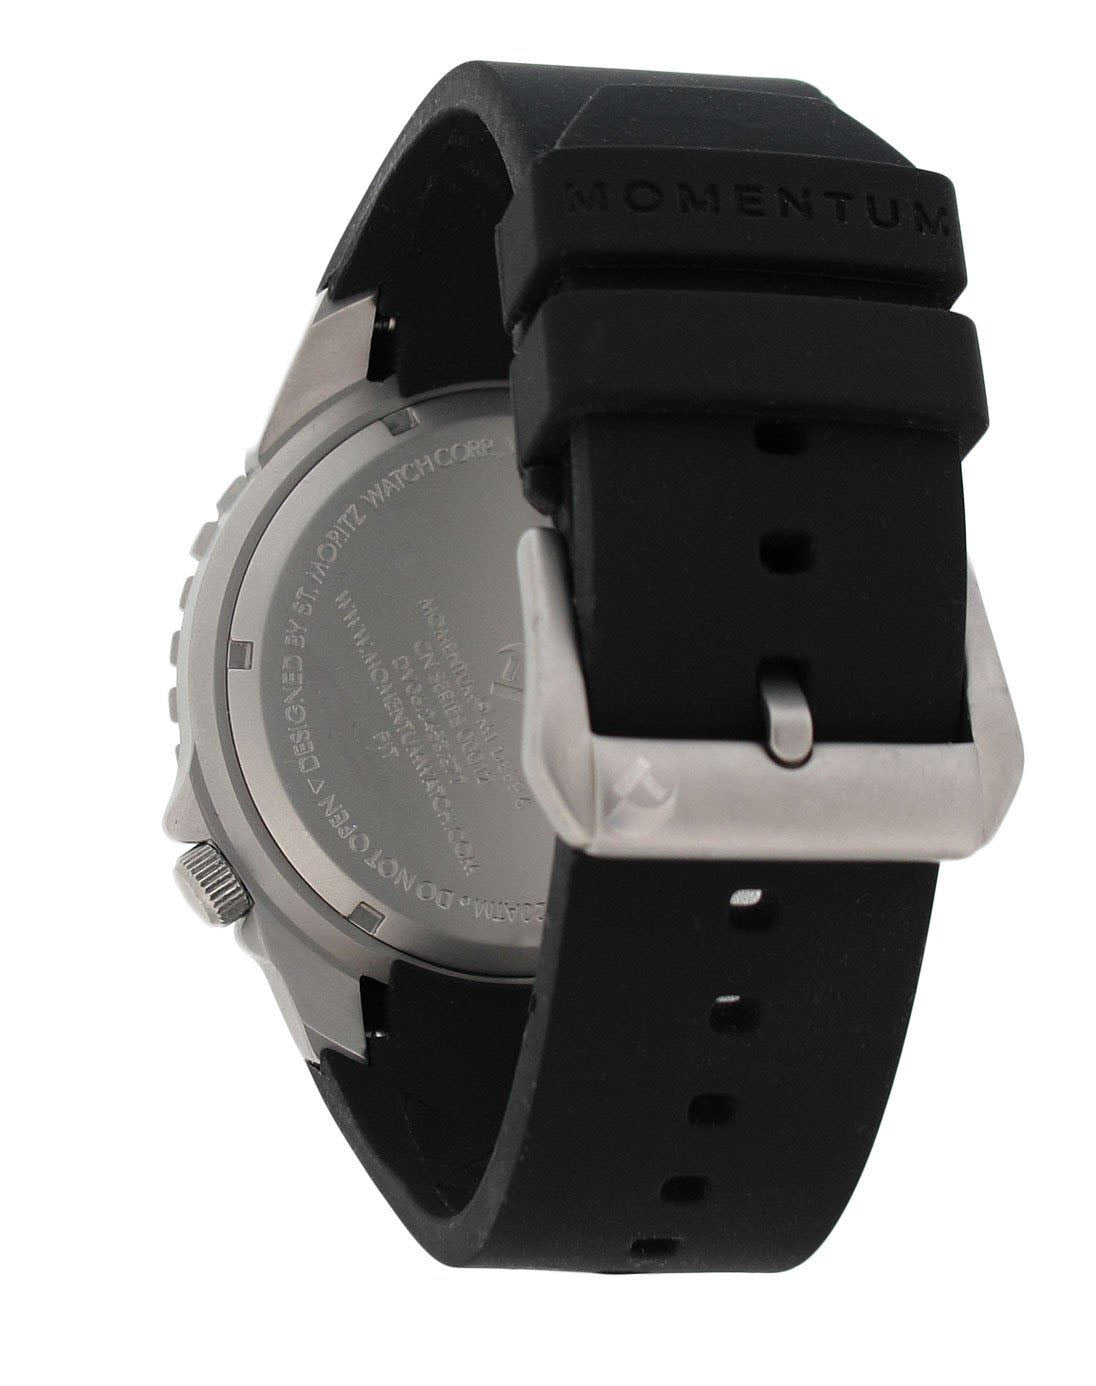 Momentum Deep 6 in Black Face with Black Rubber Strap